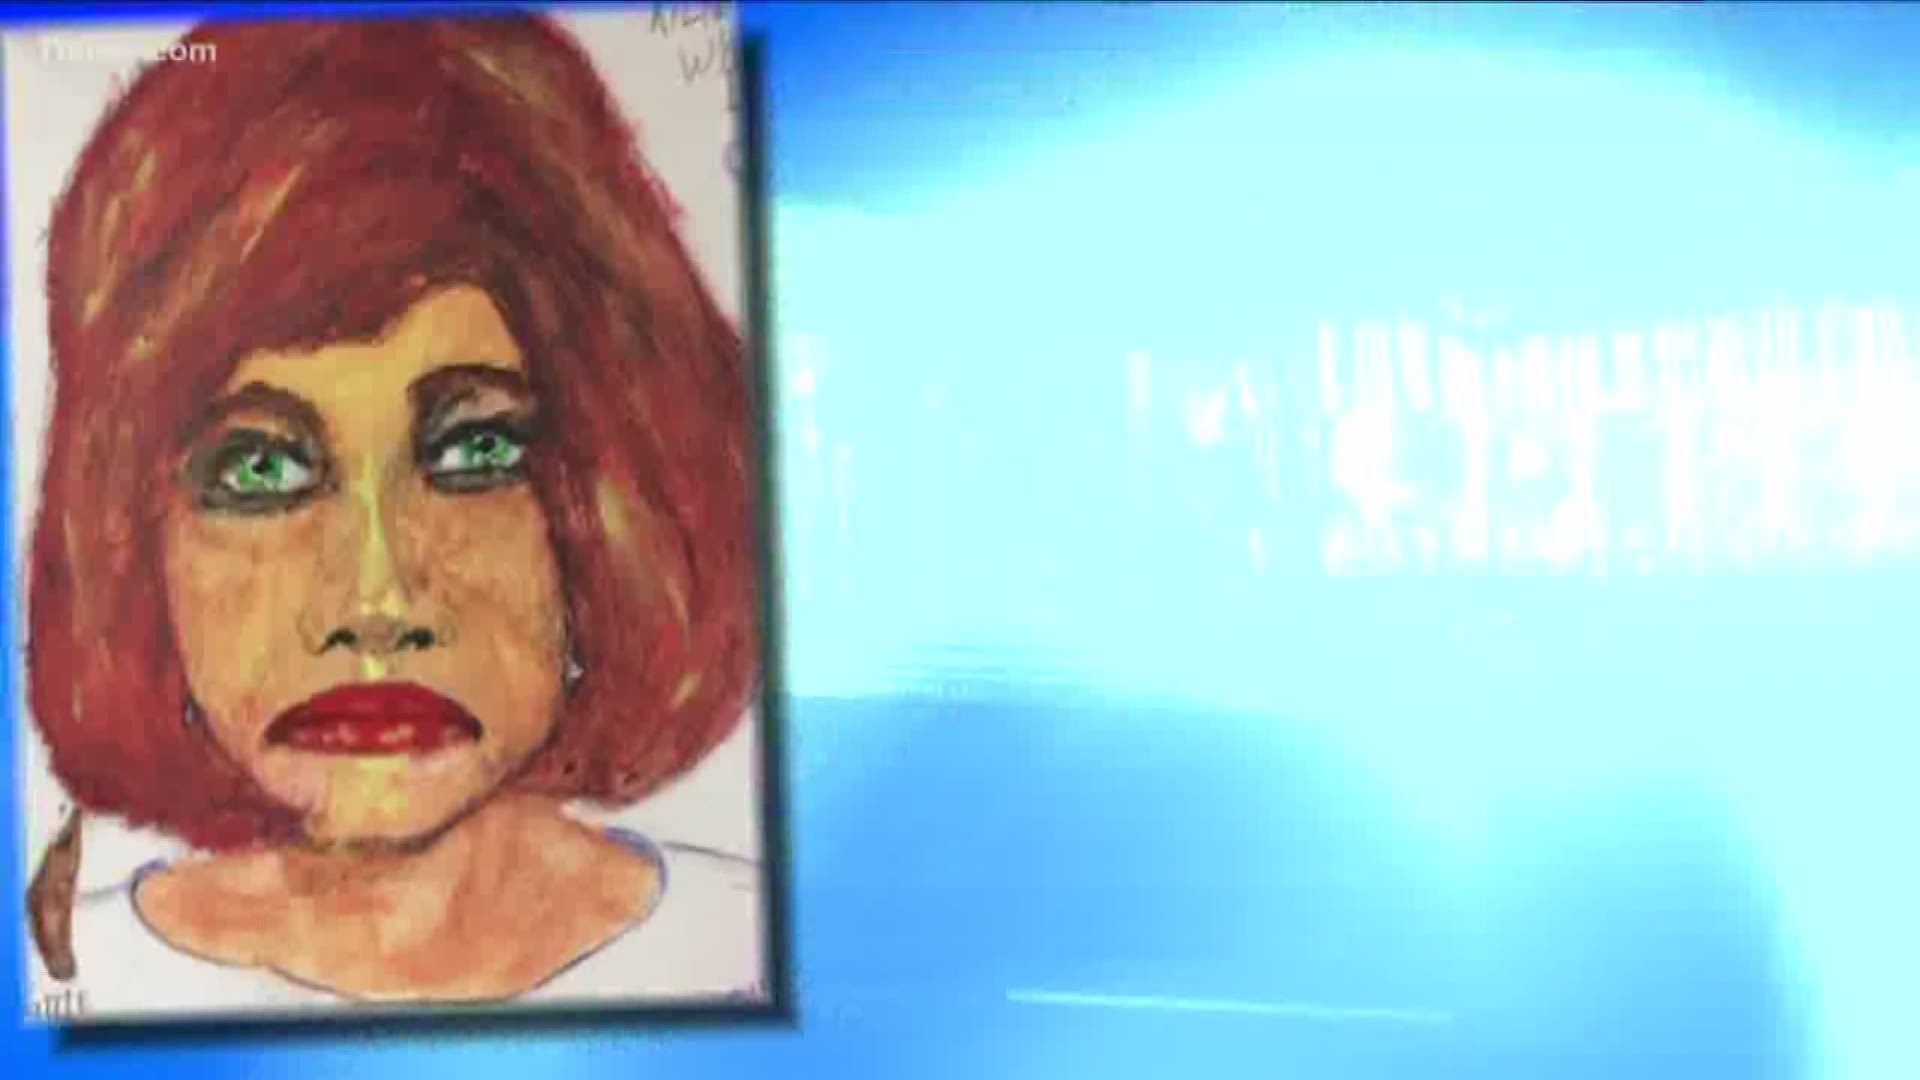 Convicted serial killer Samuel Little, who has confessed to 90 murders across the country, has sketched a picture of an Atlanta woman he claims to have killed in the 1980s. The 78-year-old man, who is currently held at a Texas prison, claims to be the most prolific serial killer in American history.